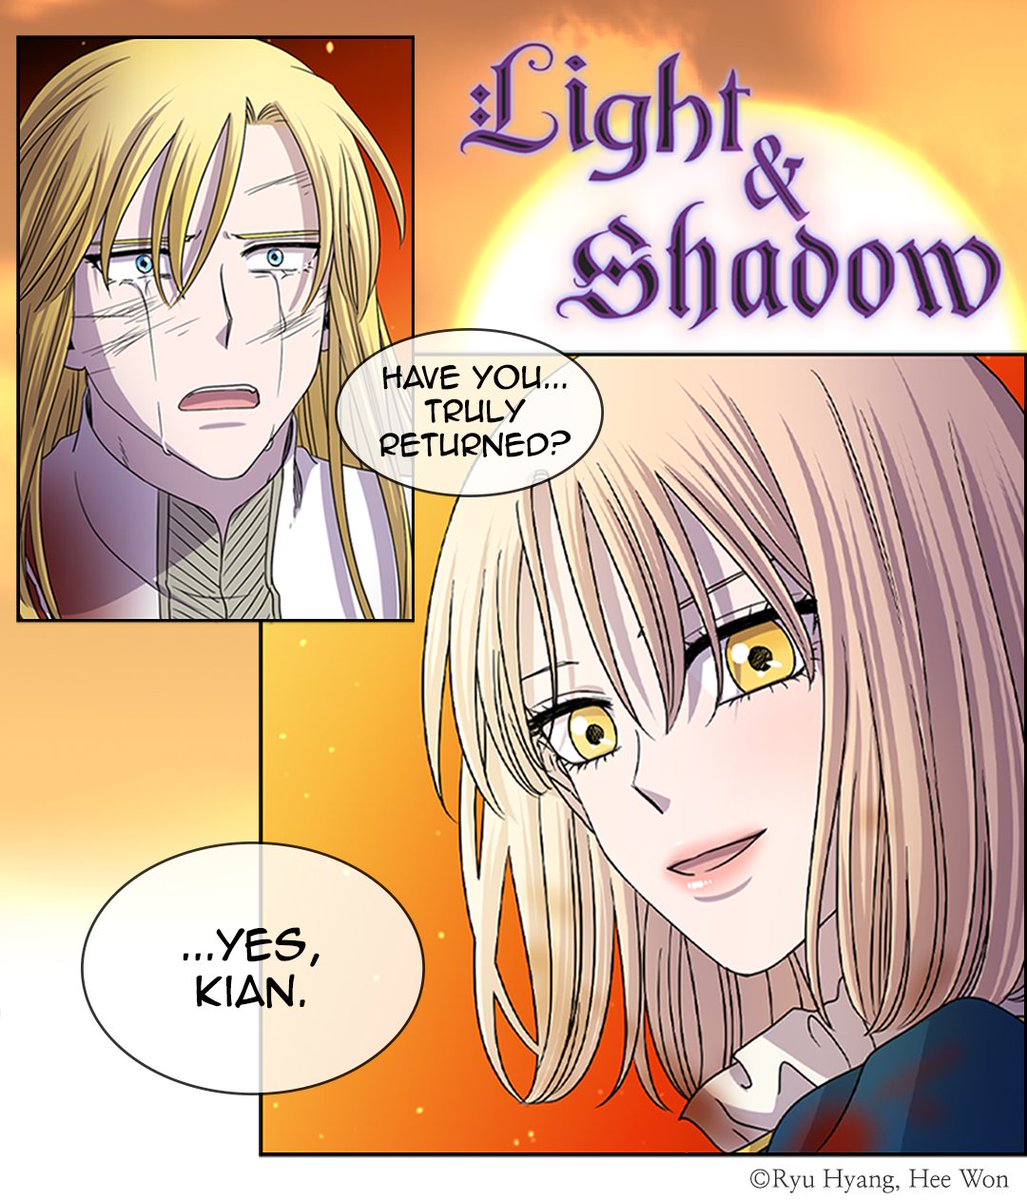 Overvind Nysgerrighed manuskript Tappytoon Comics on Twitter: "💜NEW EPISODE💜 #Romance #Fantasy  #LightandShadow 👉https://t.co/y09U78Es9Y ☀️Kian, you've fought well,  but... ☀️Stay back. You must not die here…! ・Read 'Light and Shadow'  episode.68 on #TappyToon today! ・She fights